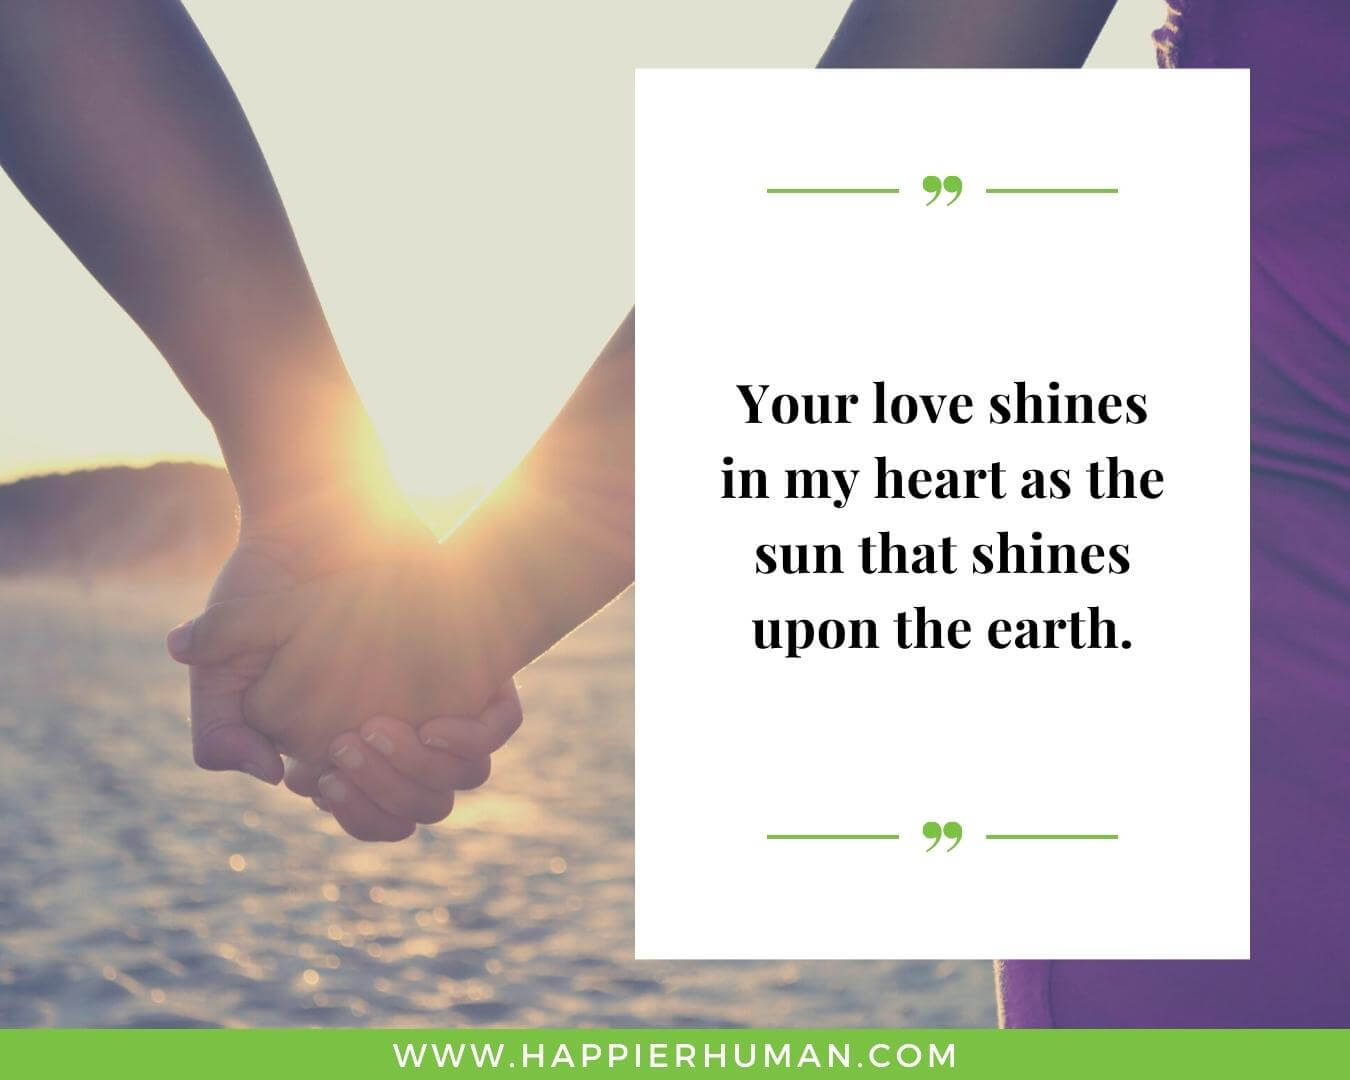 Unconditional Love Quotes for Her - “Your love shines in my heart as the sun that shines upon the earth.”